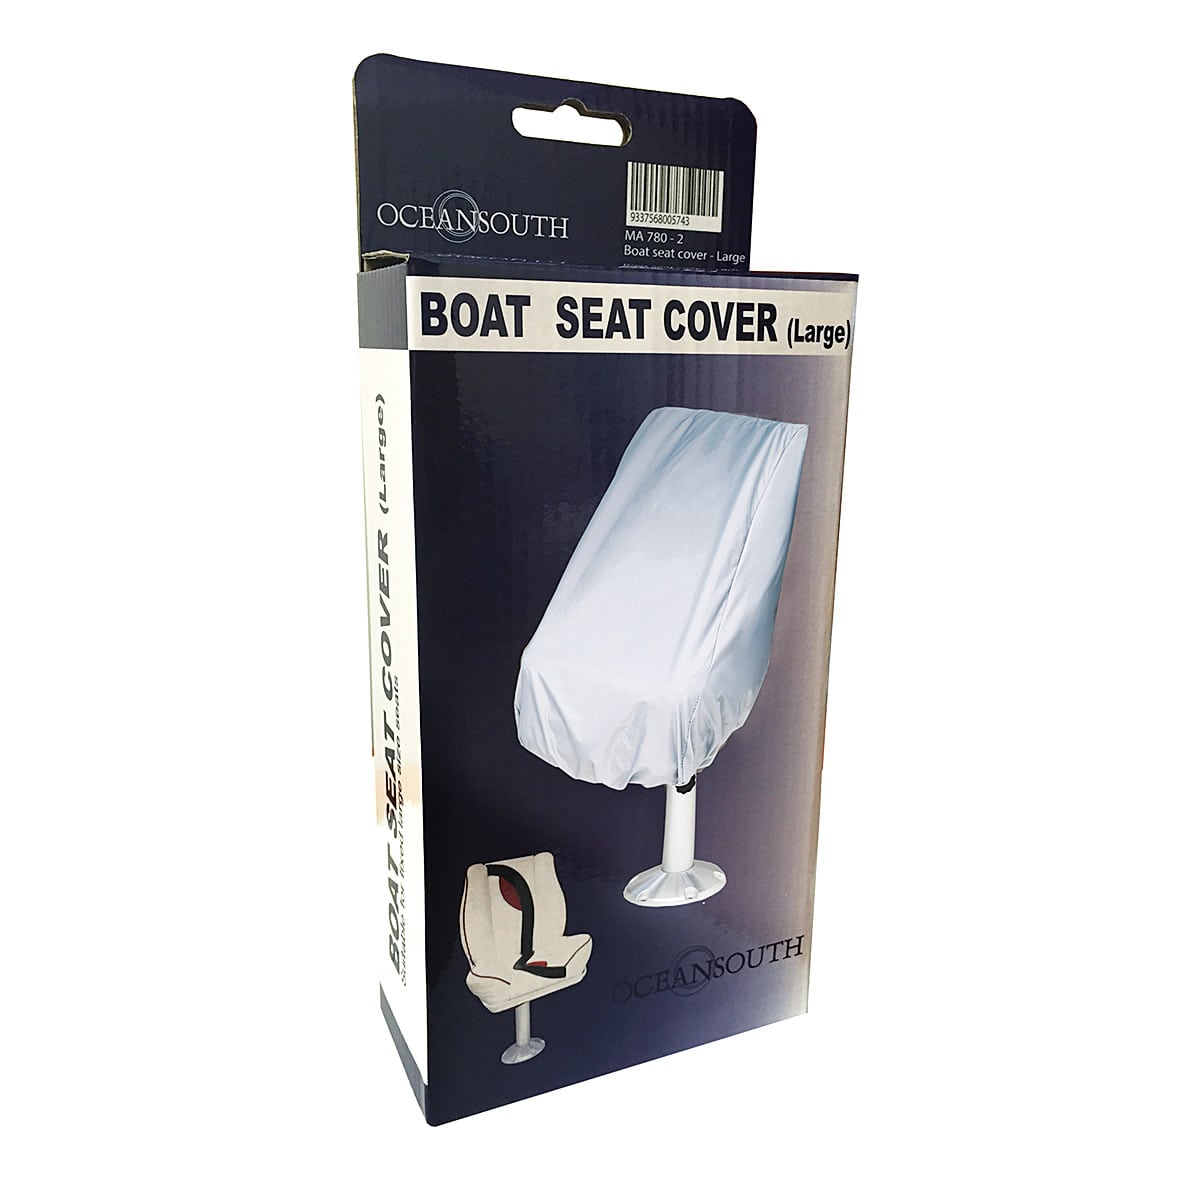 Boat Seat Cover (Large) Box